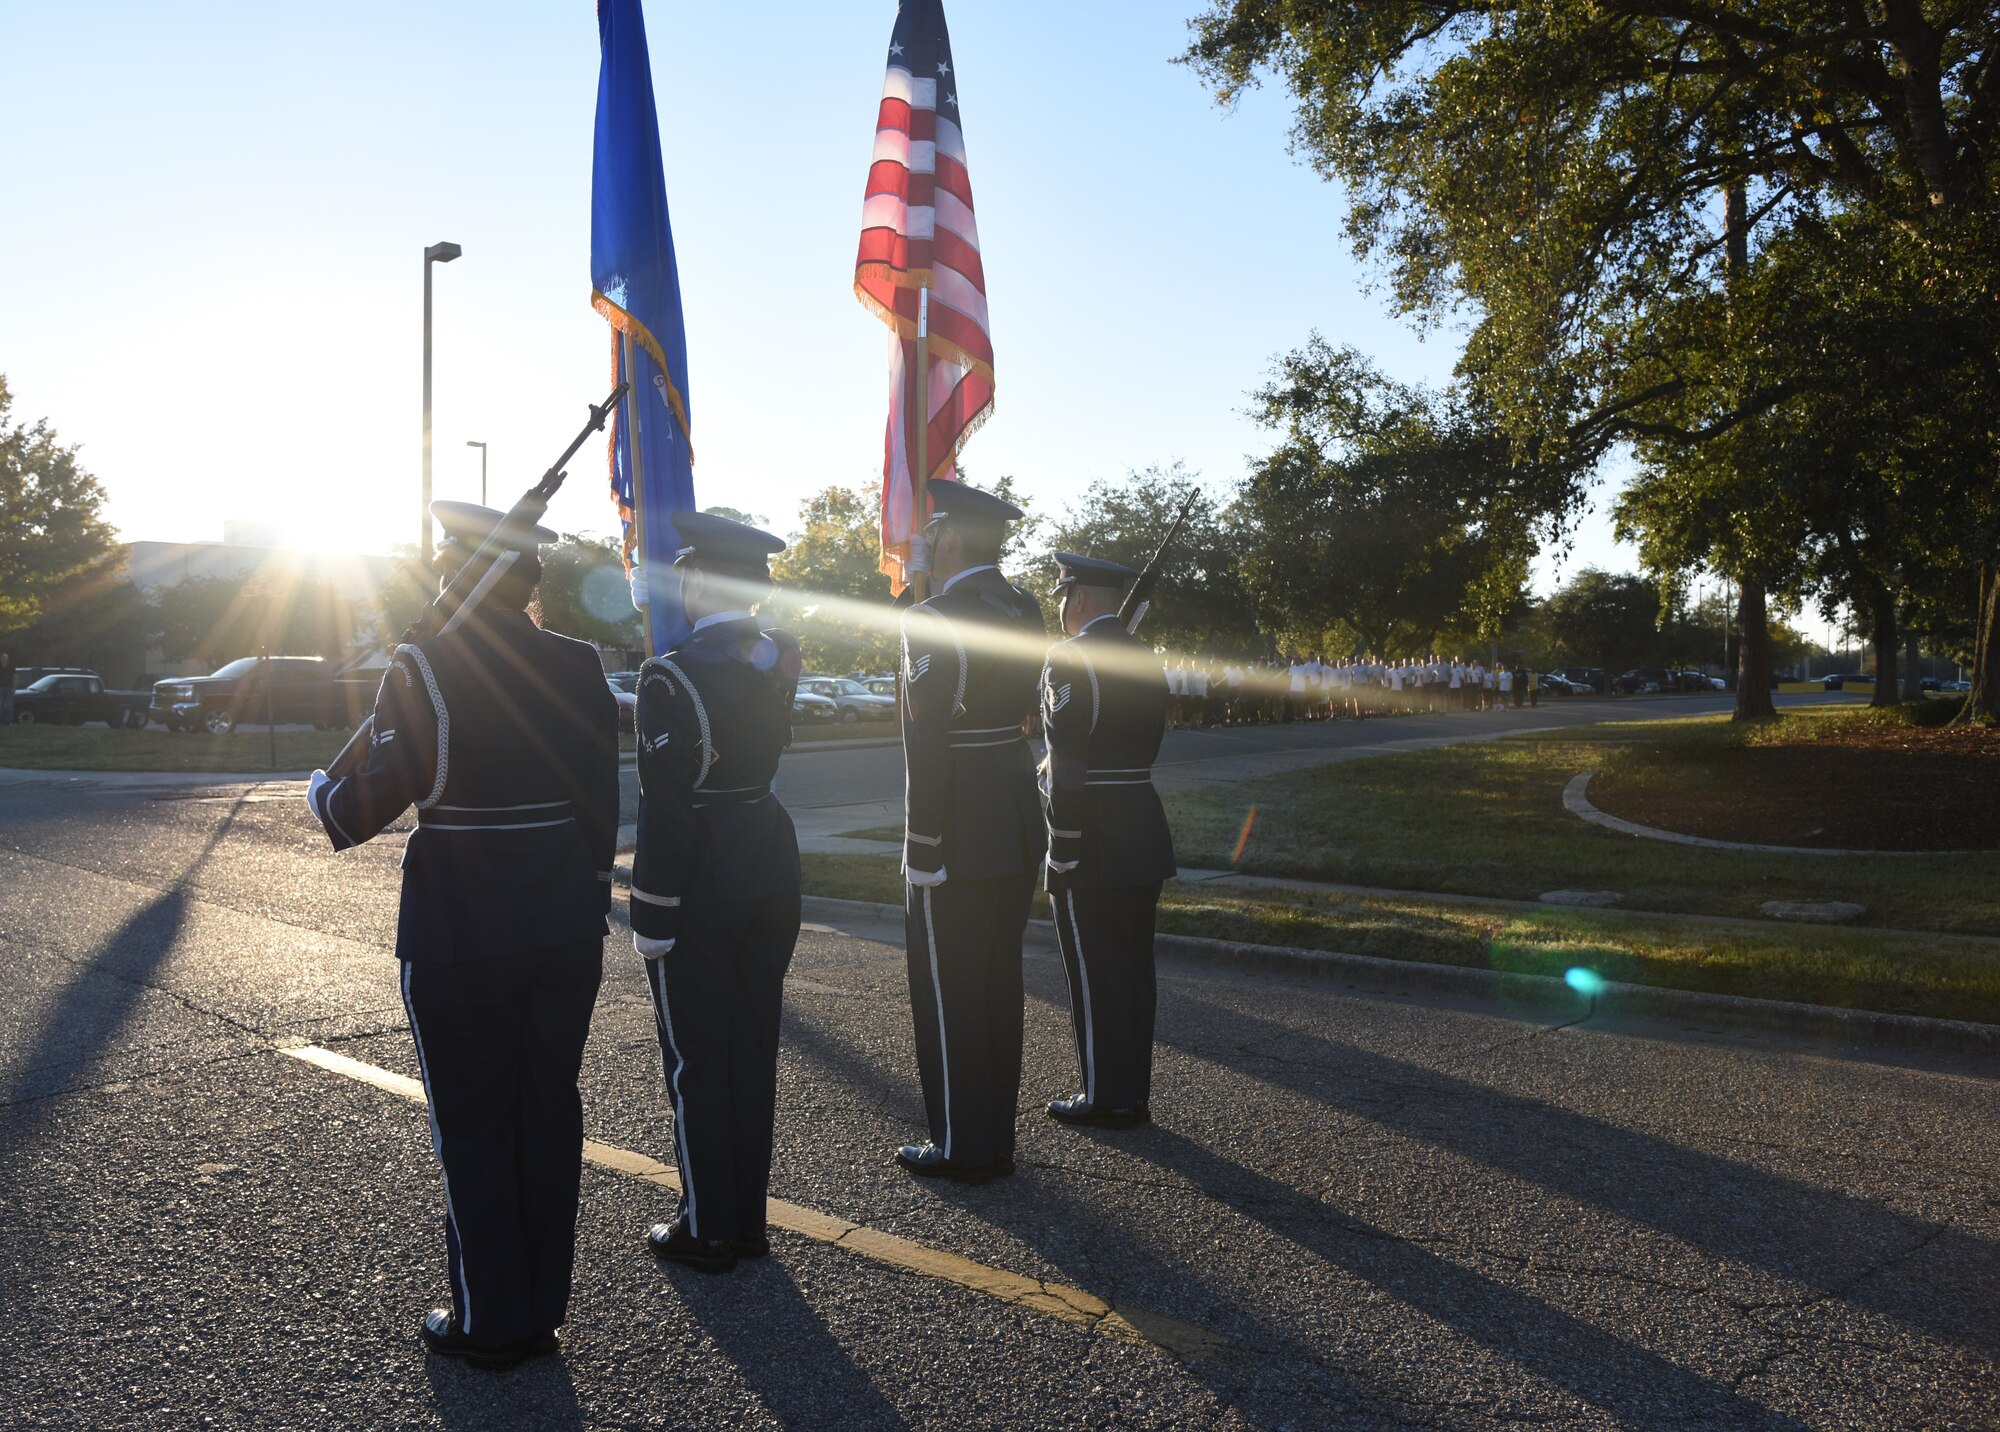 The Keesler Air Force Base Honor Guard posts the colors during the singing of the national anthem during an 81st Training Wing color run Nov. 17, 2016, on Keesler Air Force Base, Miss. The run was one of several events held throughout Dragon Week, which focuses on resiliency and teambuilding initiatives across the base. (U.S. Air Force photo by Kemberly Groue/Released)